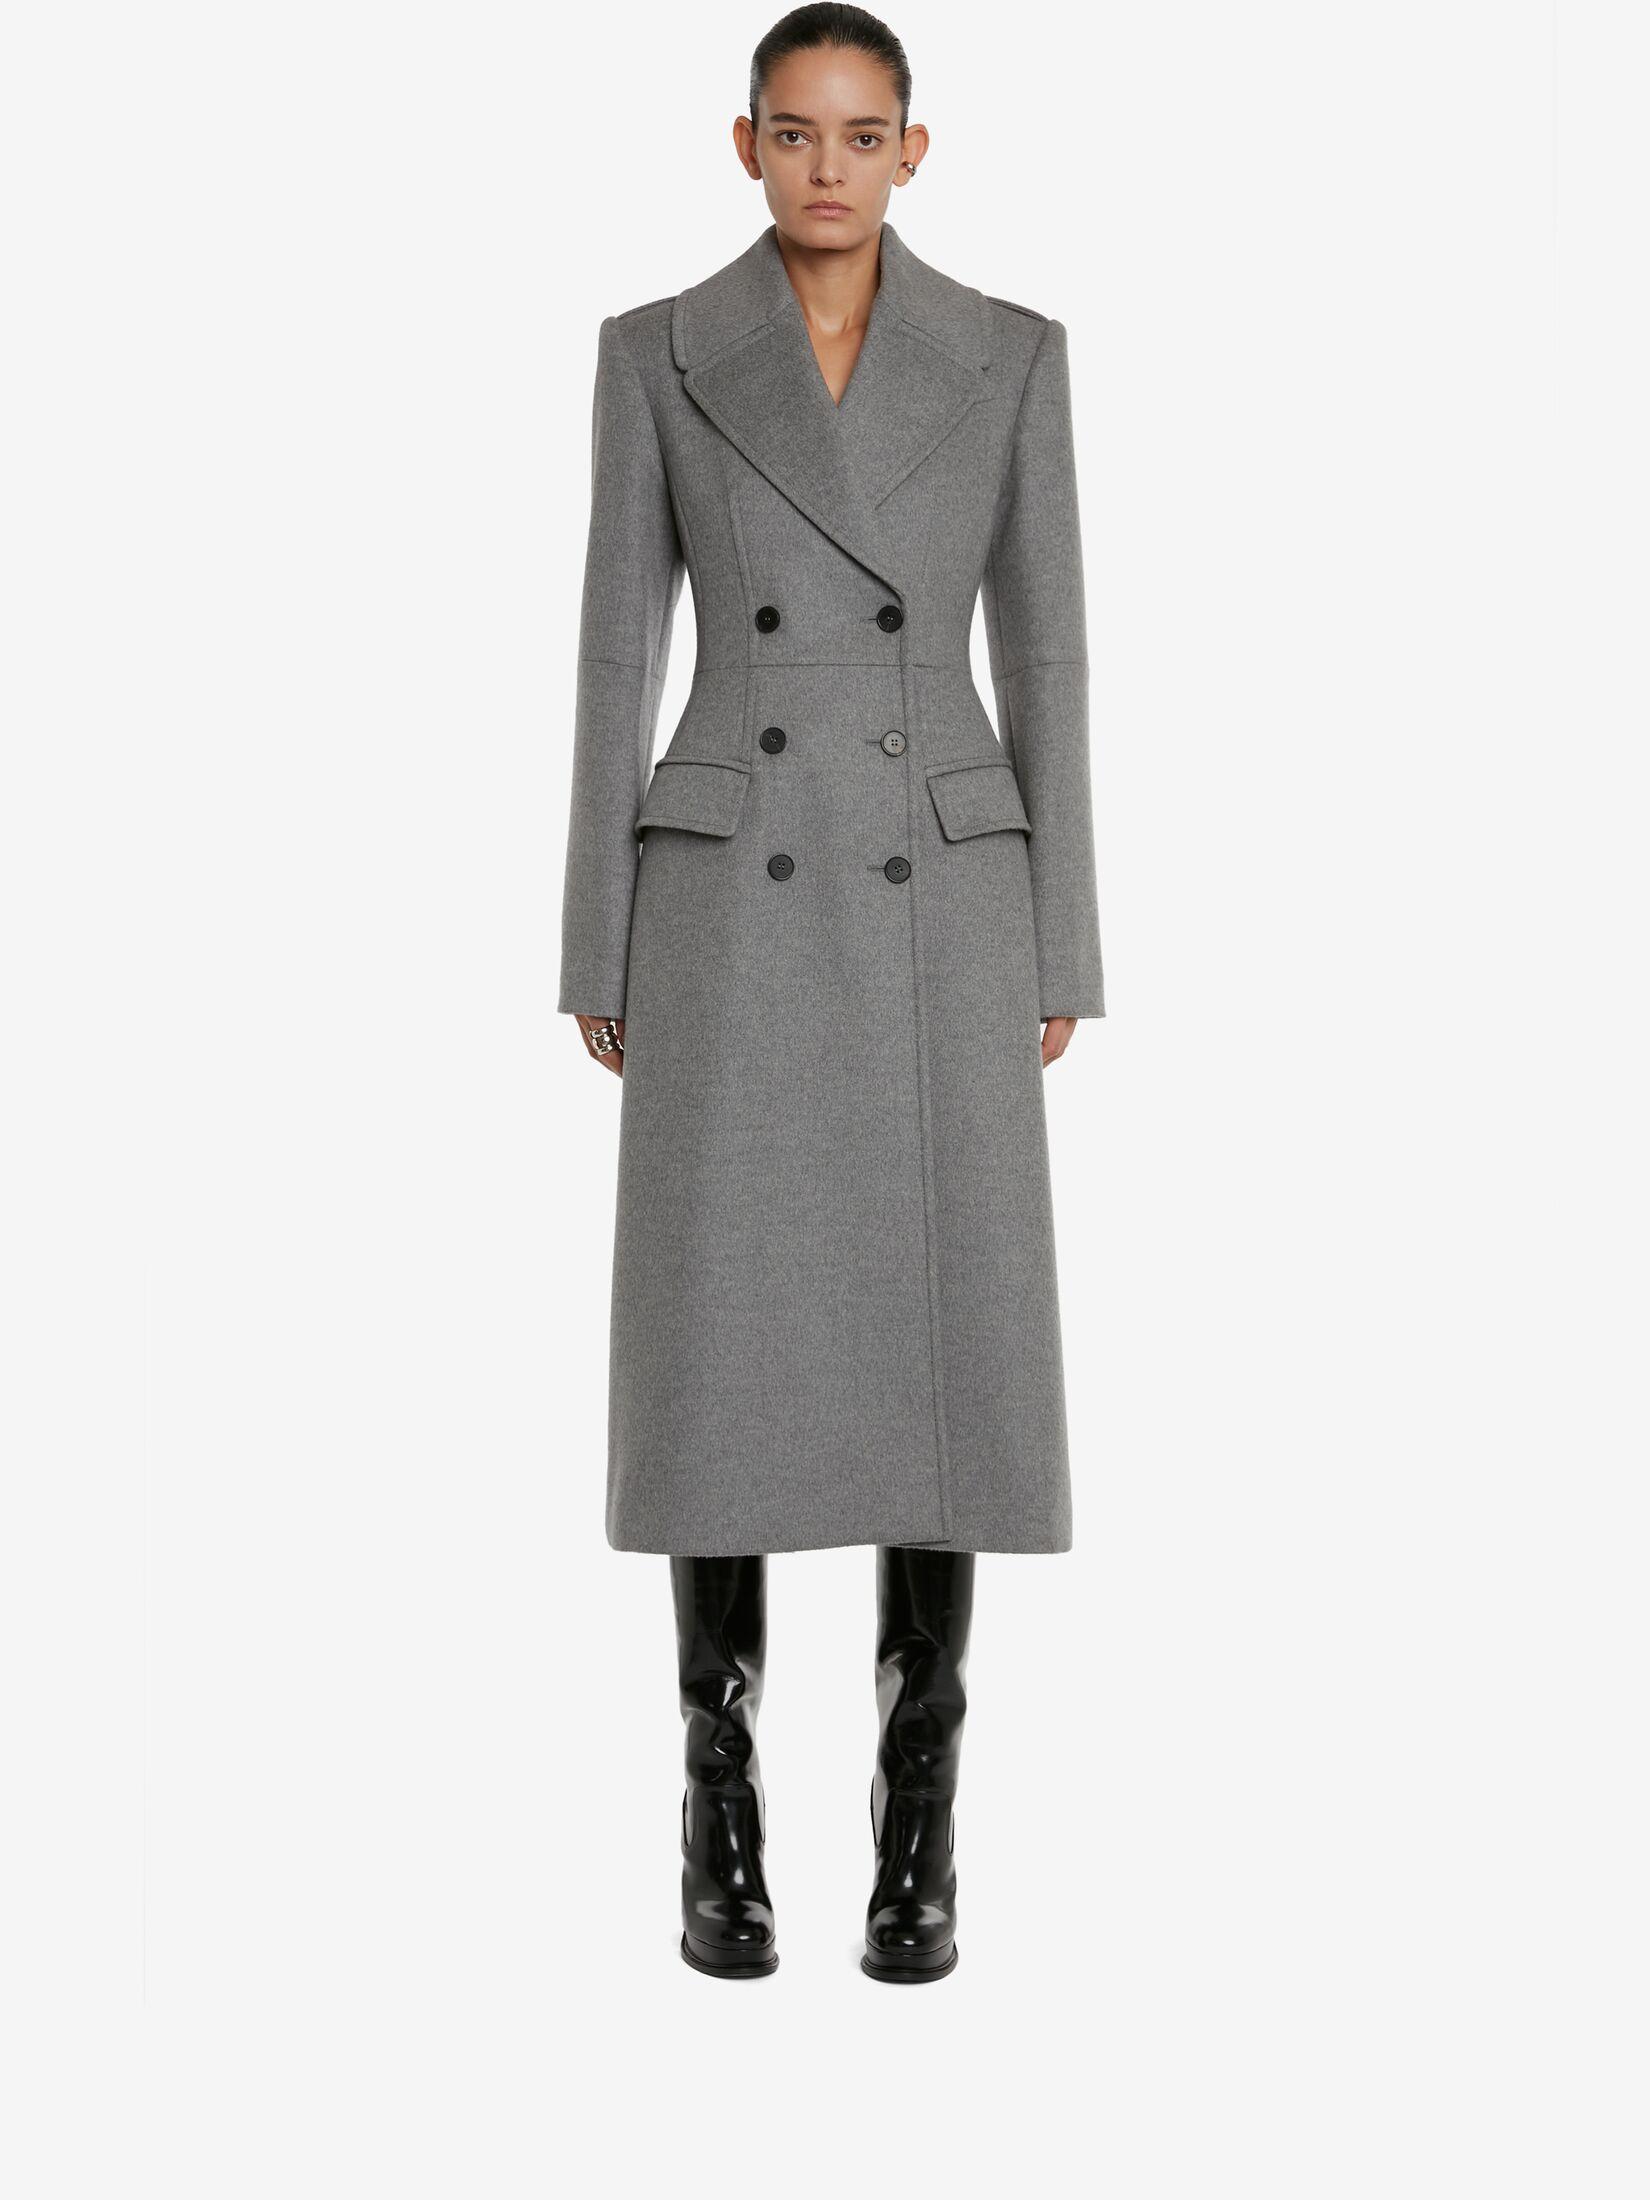 Alexander McQueen Grey & Silver Double-breasted Military Coat in Gray | Lyst